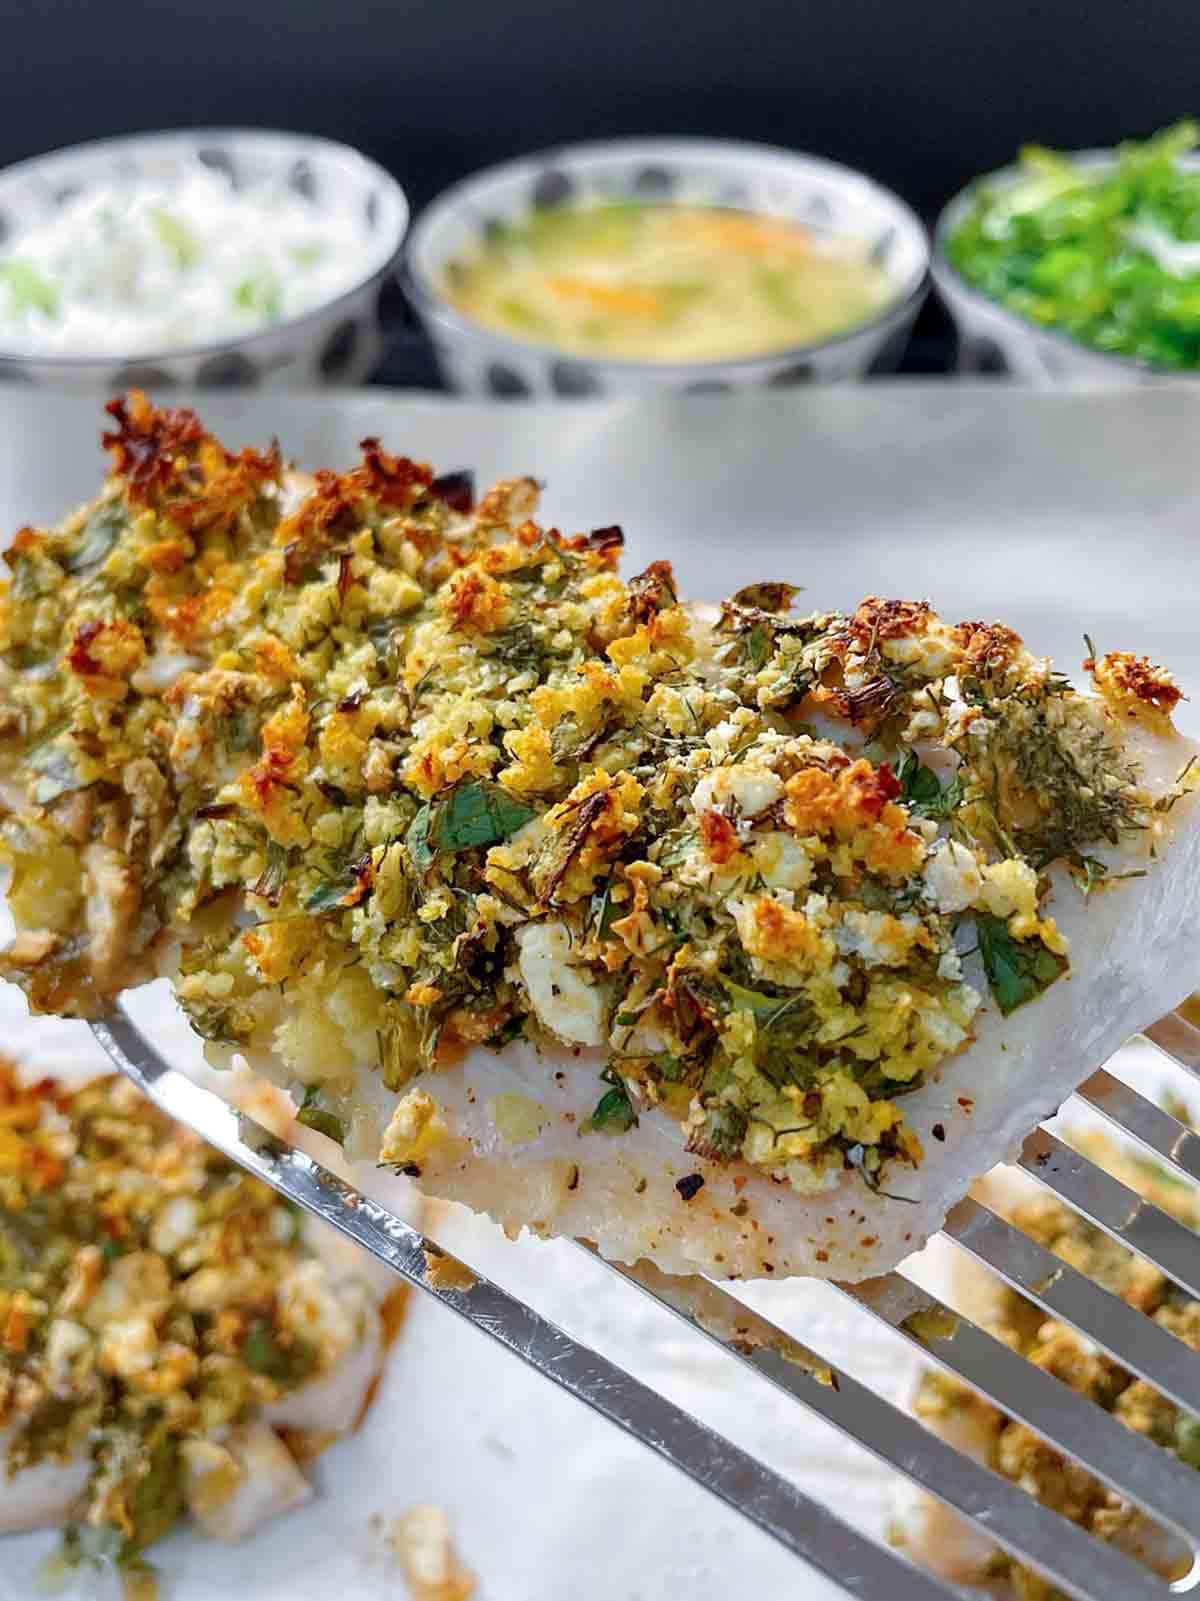 A fish spatula holding a fillet of quick baked fish with bread crumbs and herbs on top.